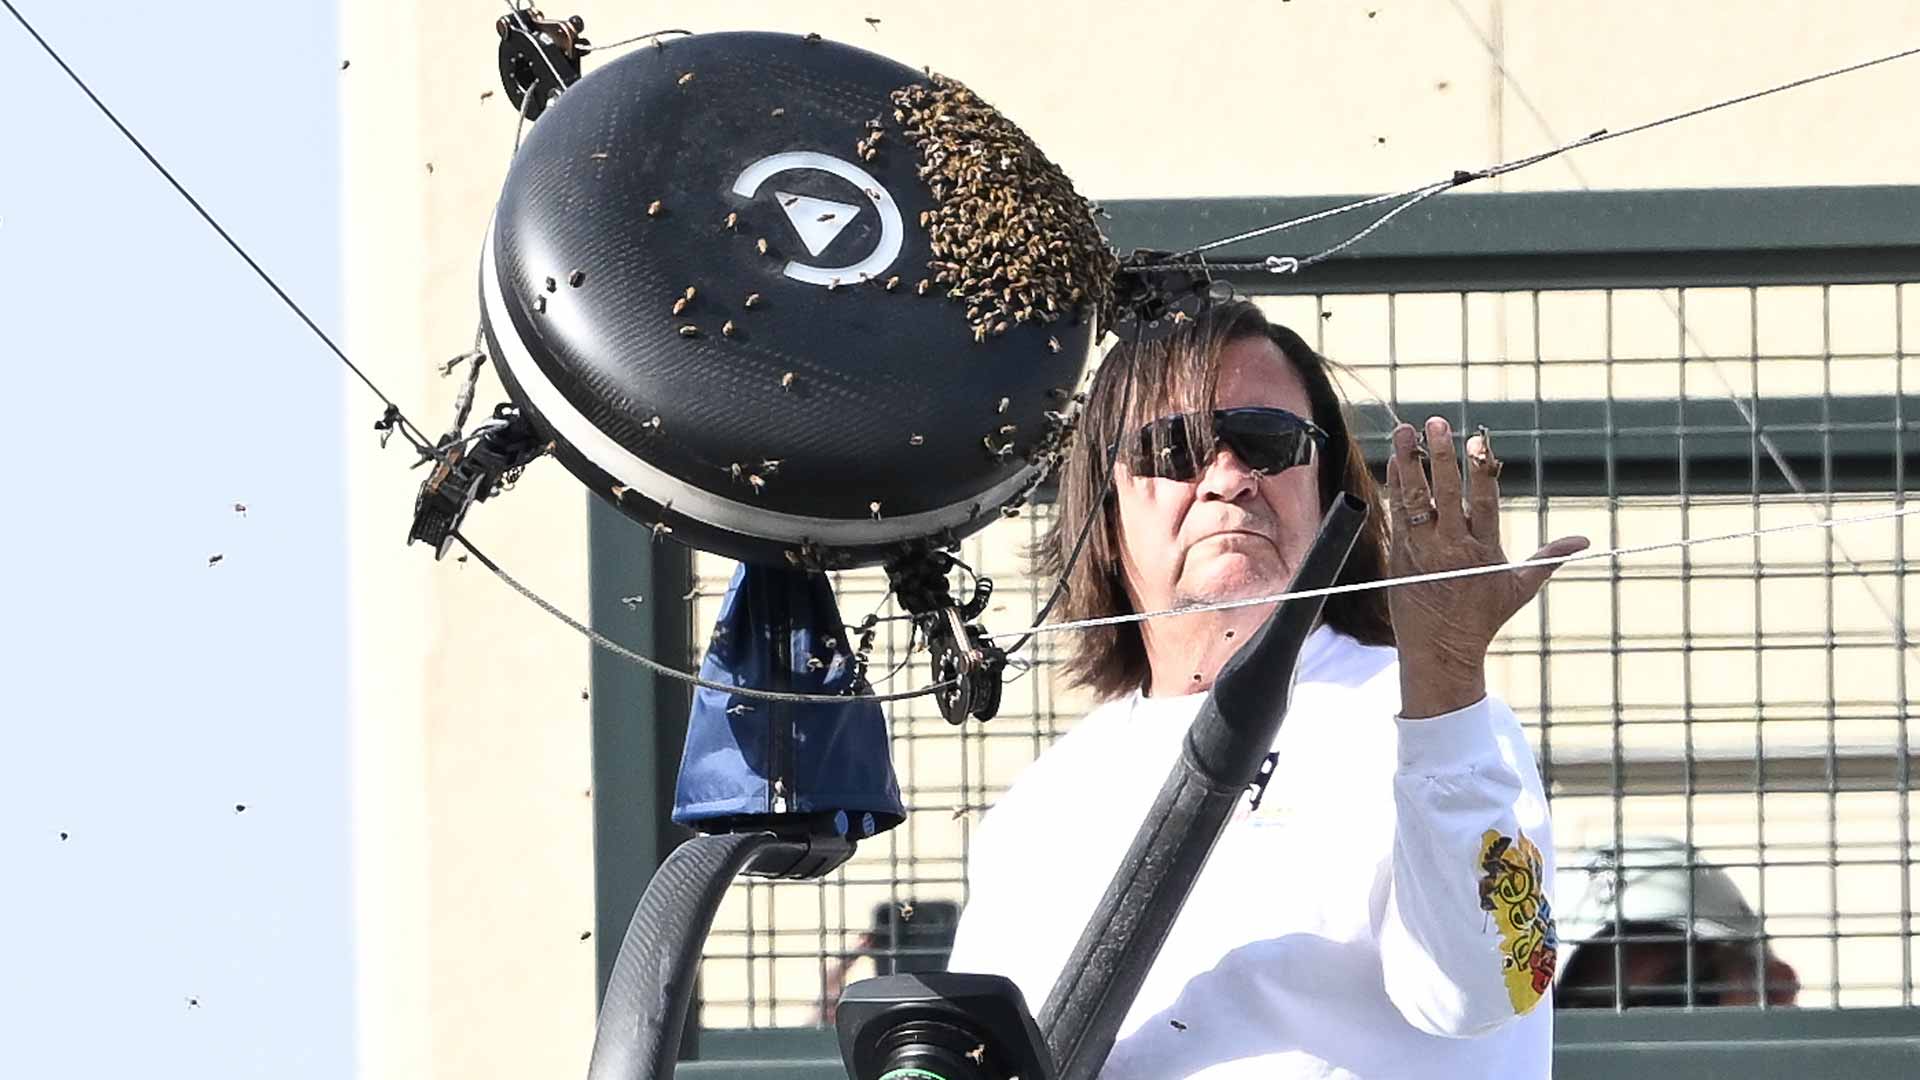 Beekeeper Lance Davis saves the day at the BNP Paribas Open!